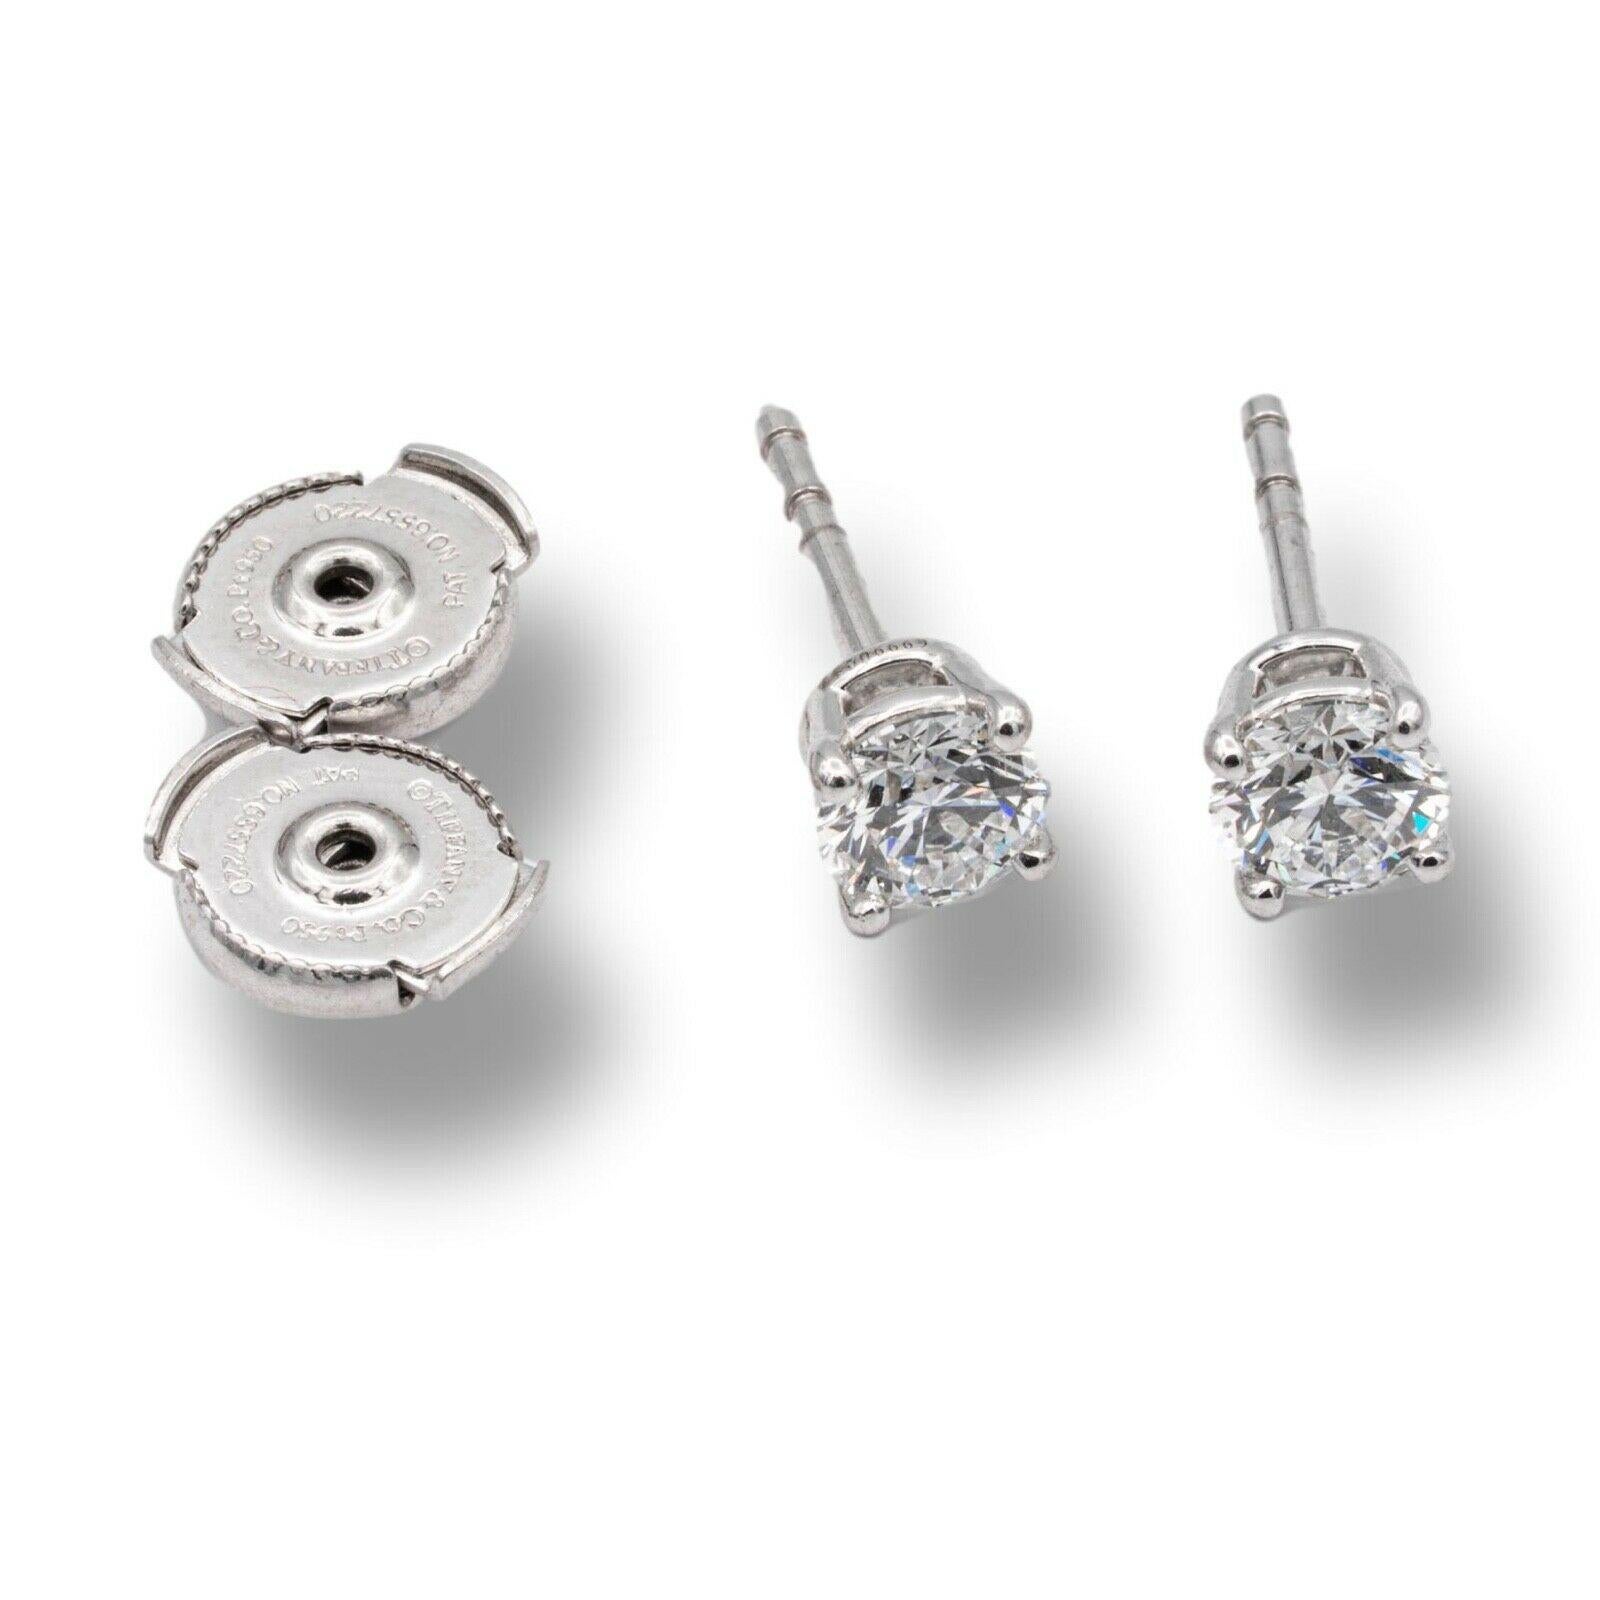 Round Cut Tiffany & Co. 0.90 Carat Total Weight Diamond Stud Earrings in Platinum